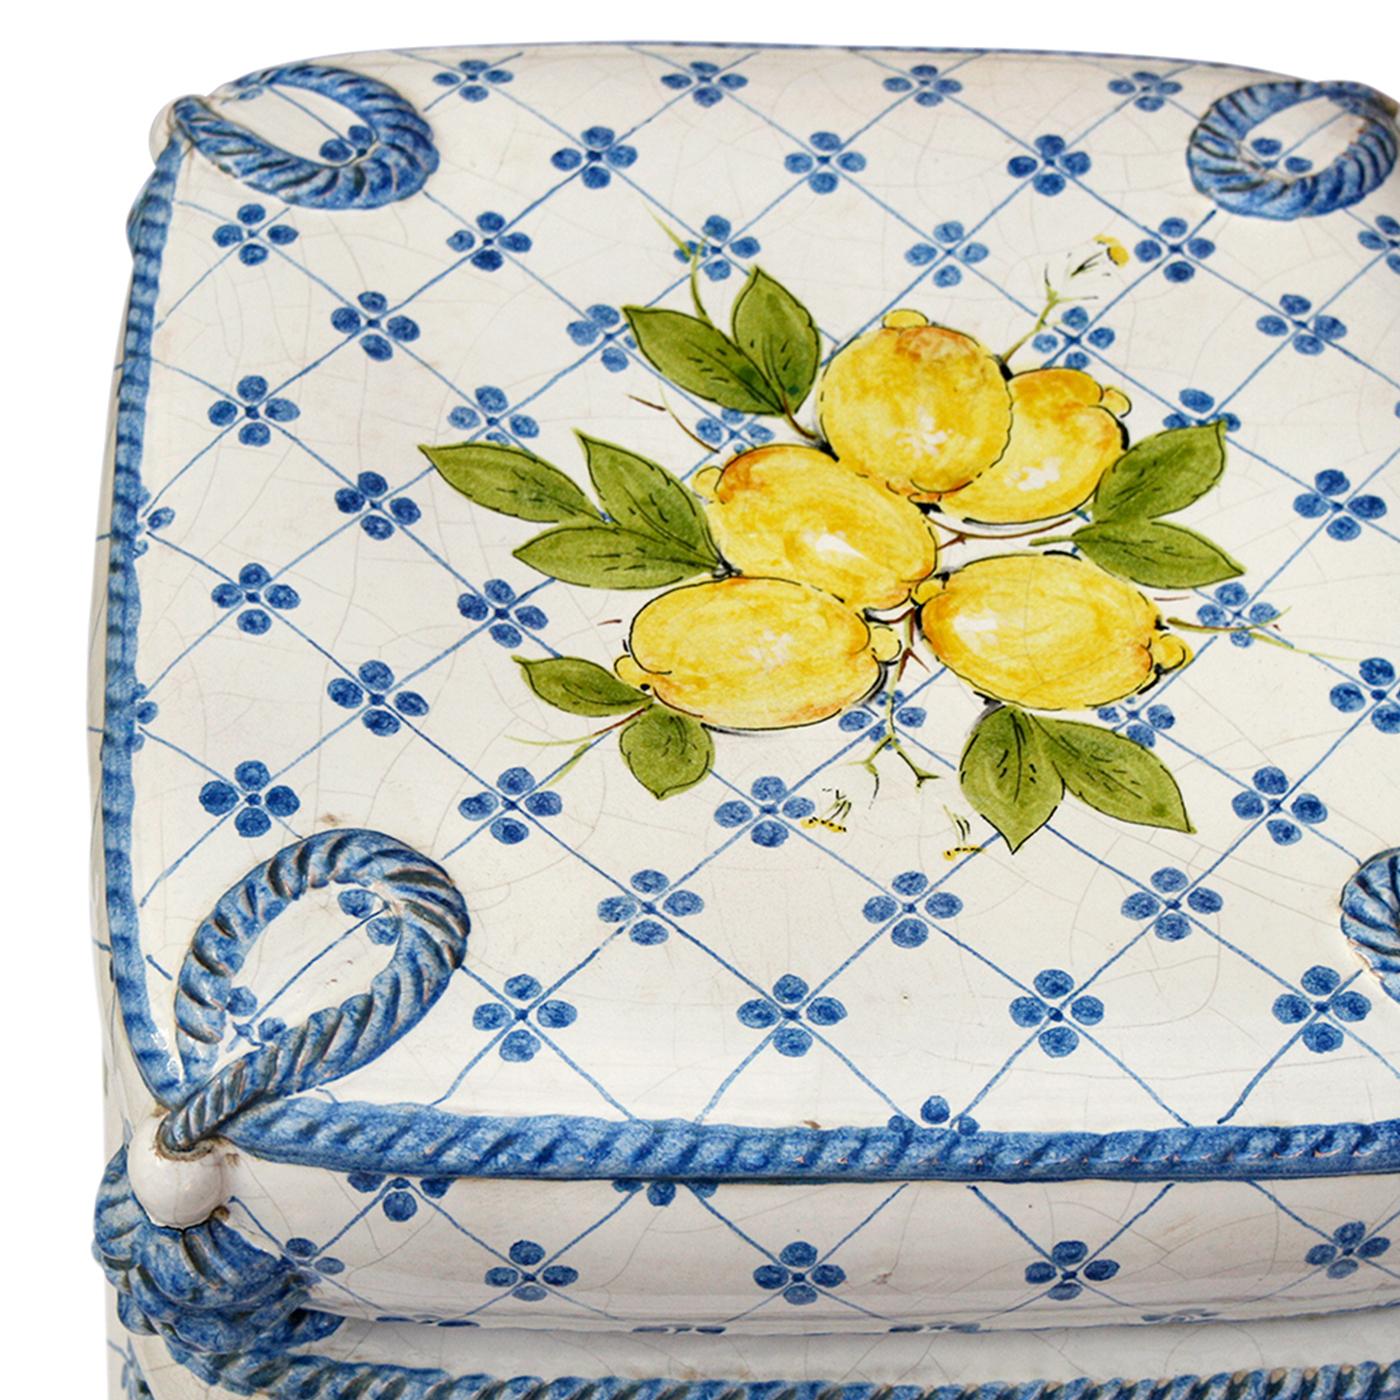 An unassuming yet sublime design, this sculpture is composed of four handcrafted ceramic cushions that can also make up for a precious and delicate stool. Superbly and minutely painted by hand in a stunning Mediterranean-inspired motif rendered in